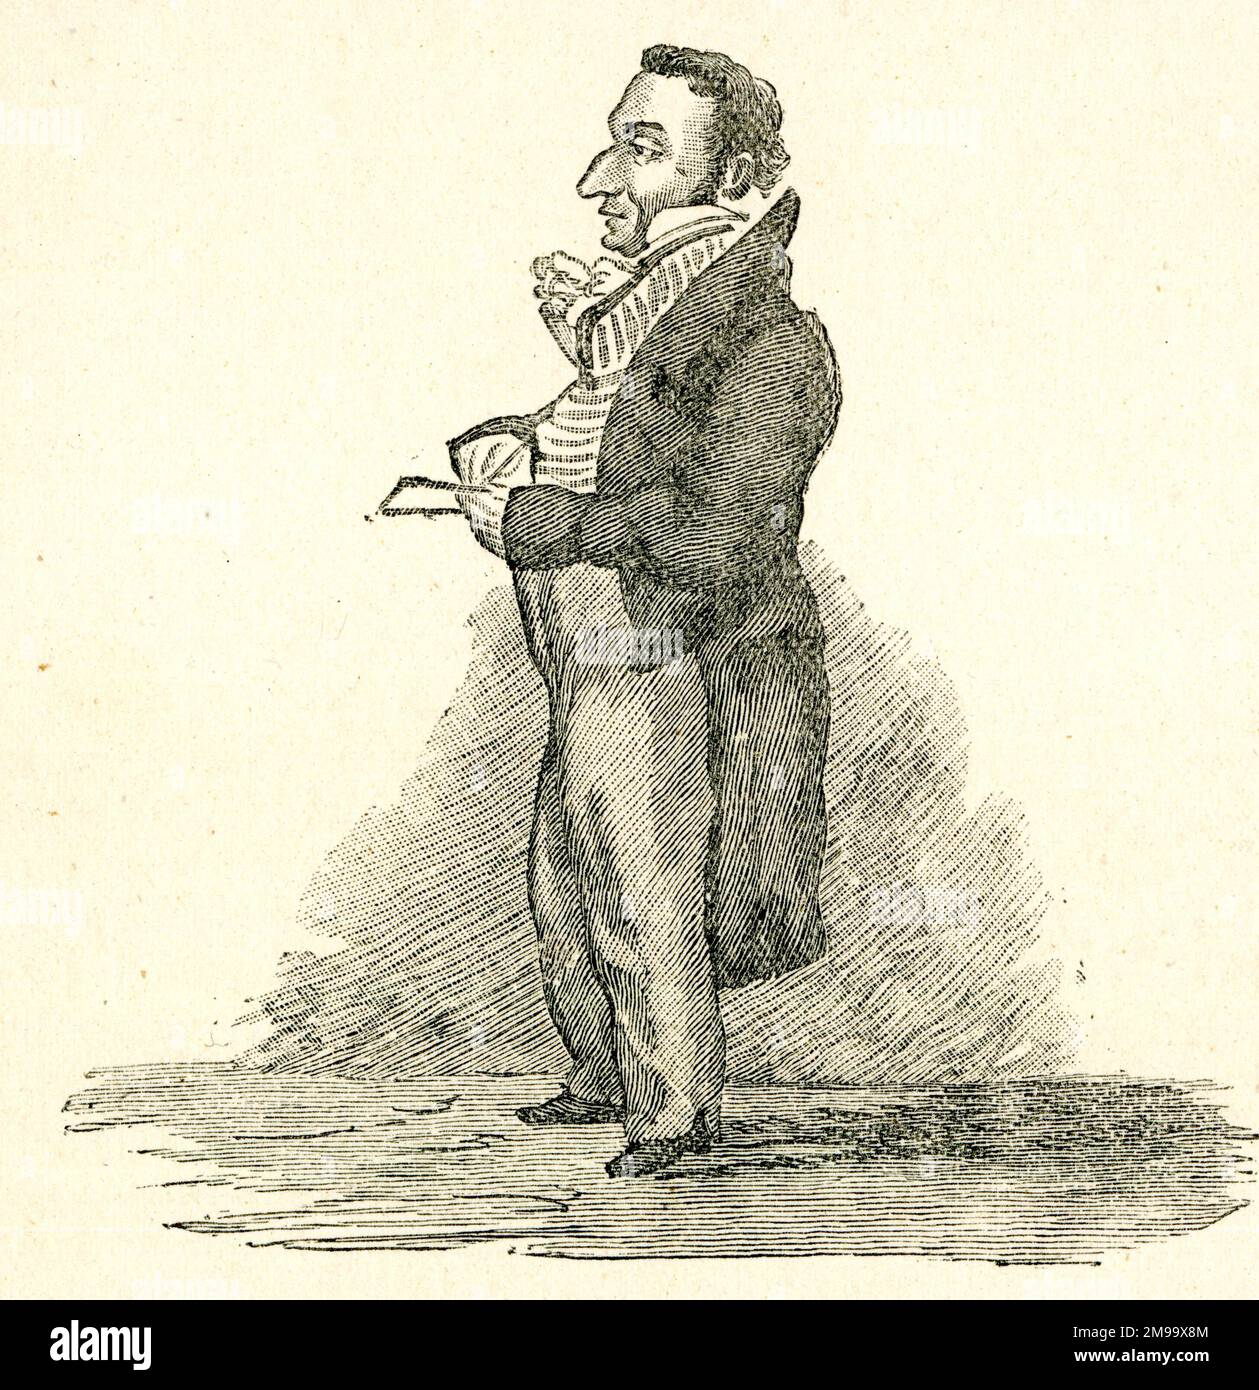 Joseph Mallord William Turner, English artist, caricature from life by Hawkesworth Fawkes. Stock Photo